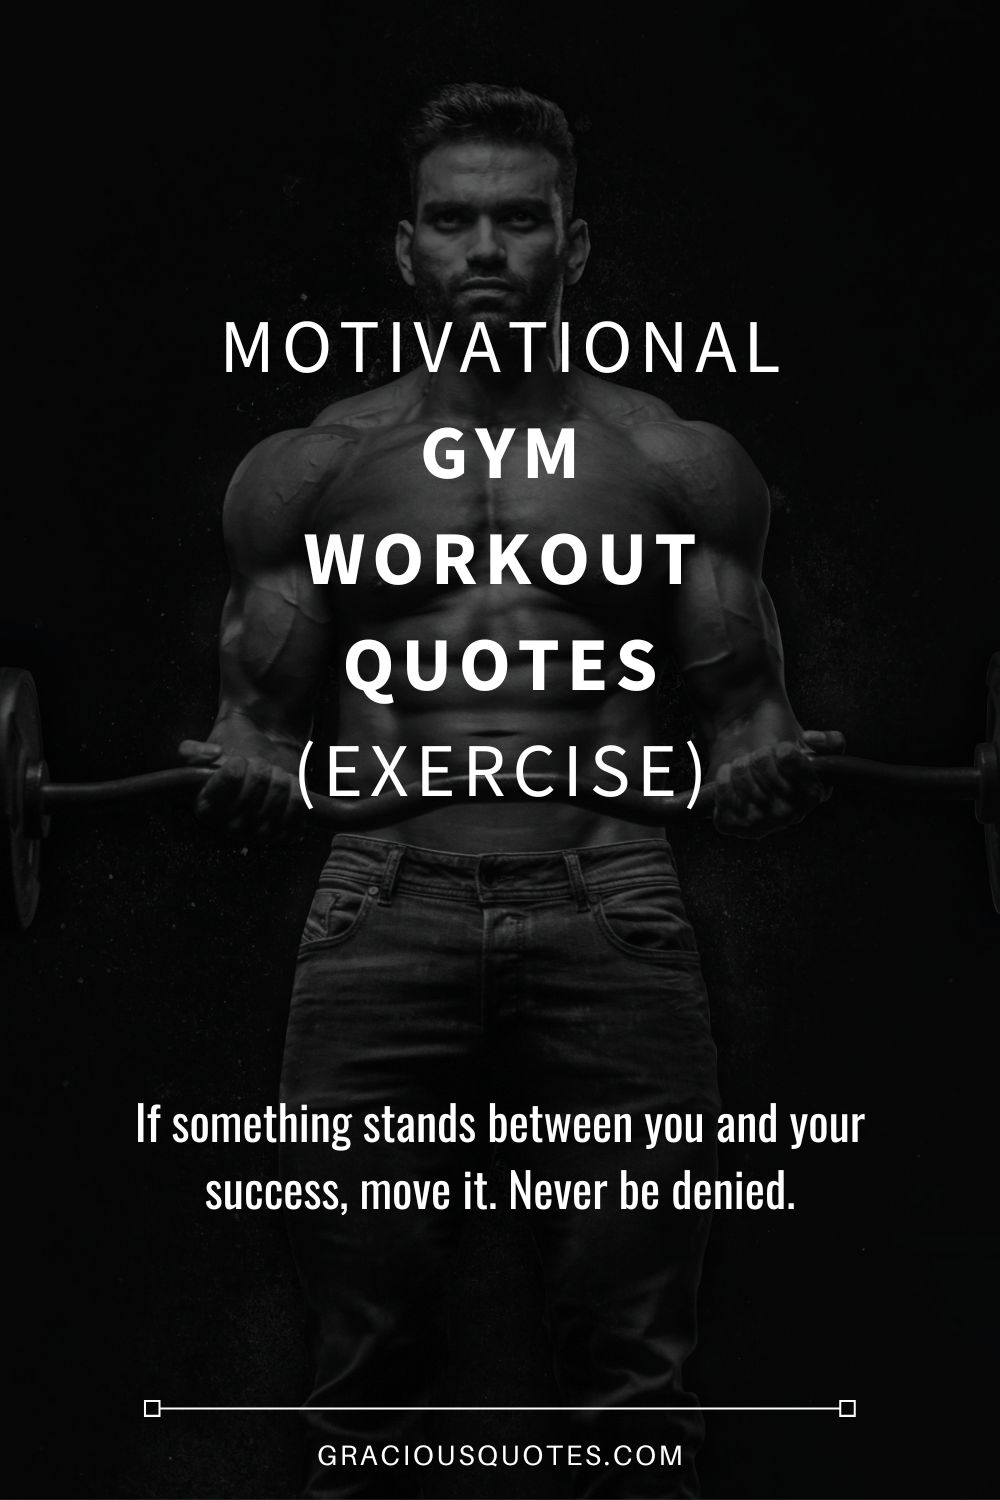 Motivational Gym Workout Quotes (EXERCISE) - Gracious Quotes